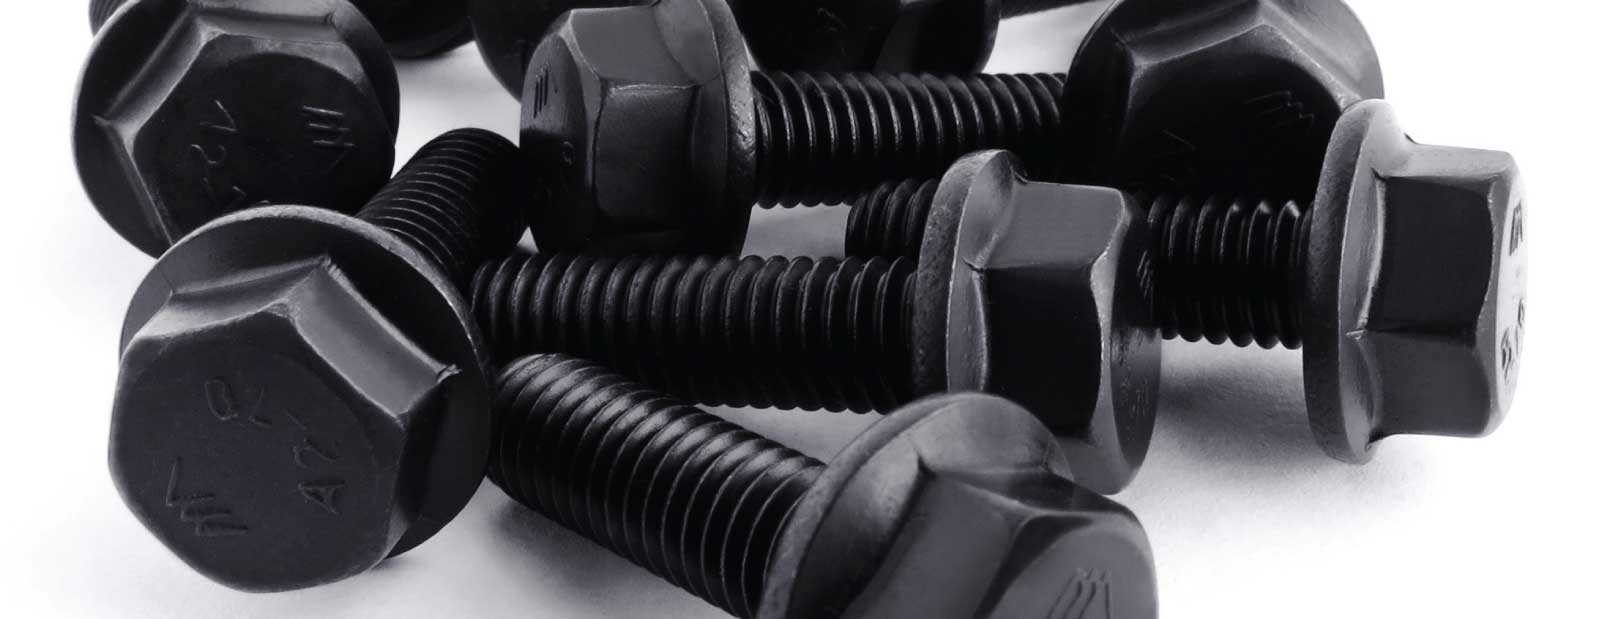 hex flange bolts made from black stainless steel